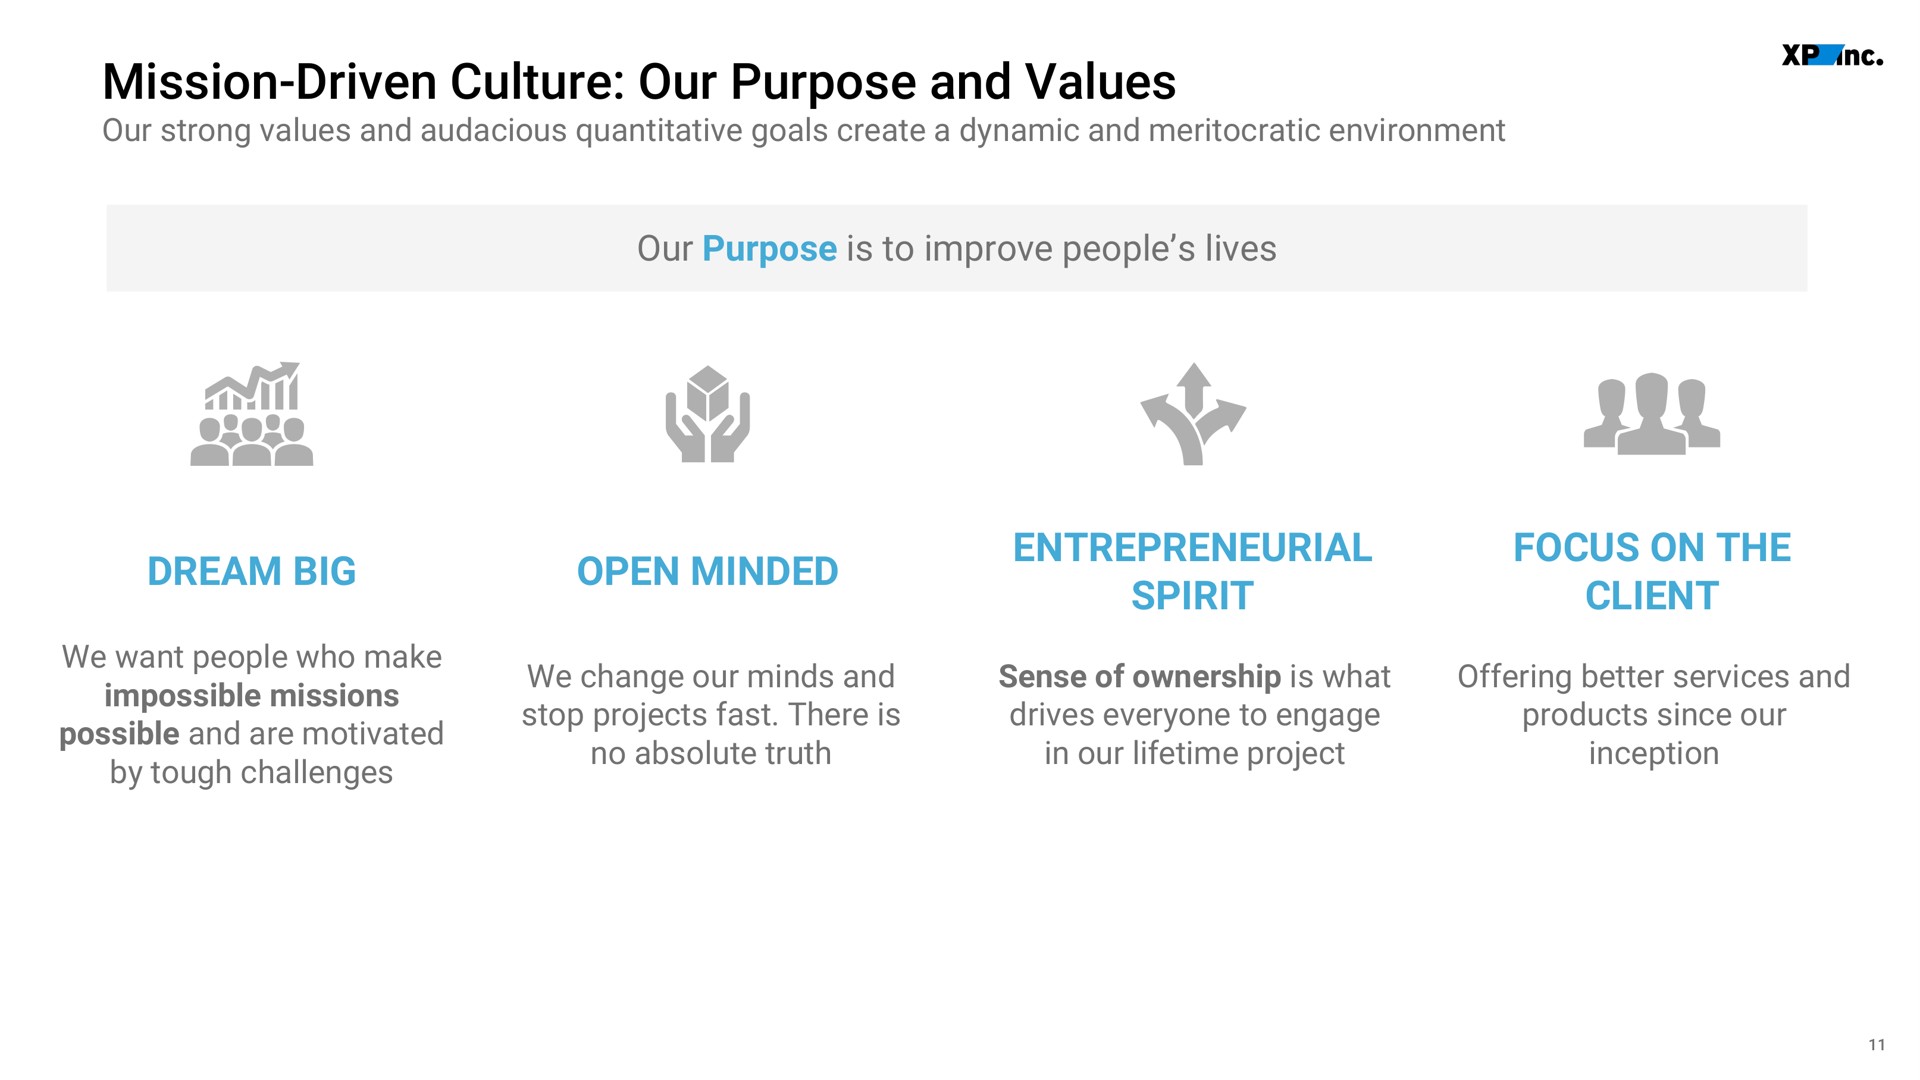 mission driven culture our purpose and values our purpose is to improve people lives dream big open minded entrepreneurial spirit focus on the client we | XP Inc